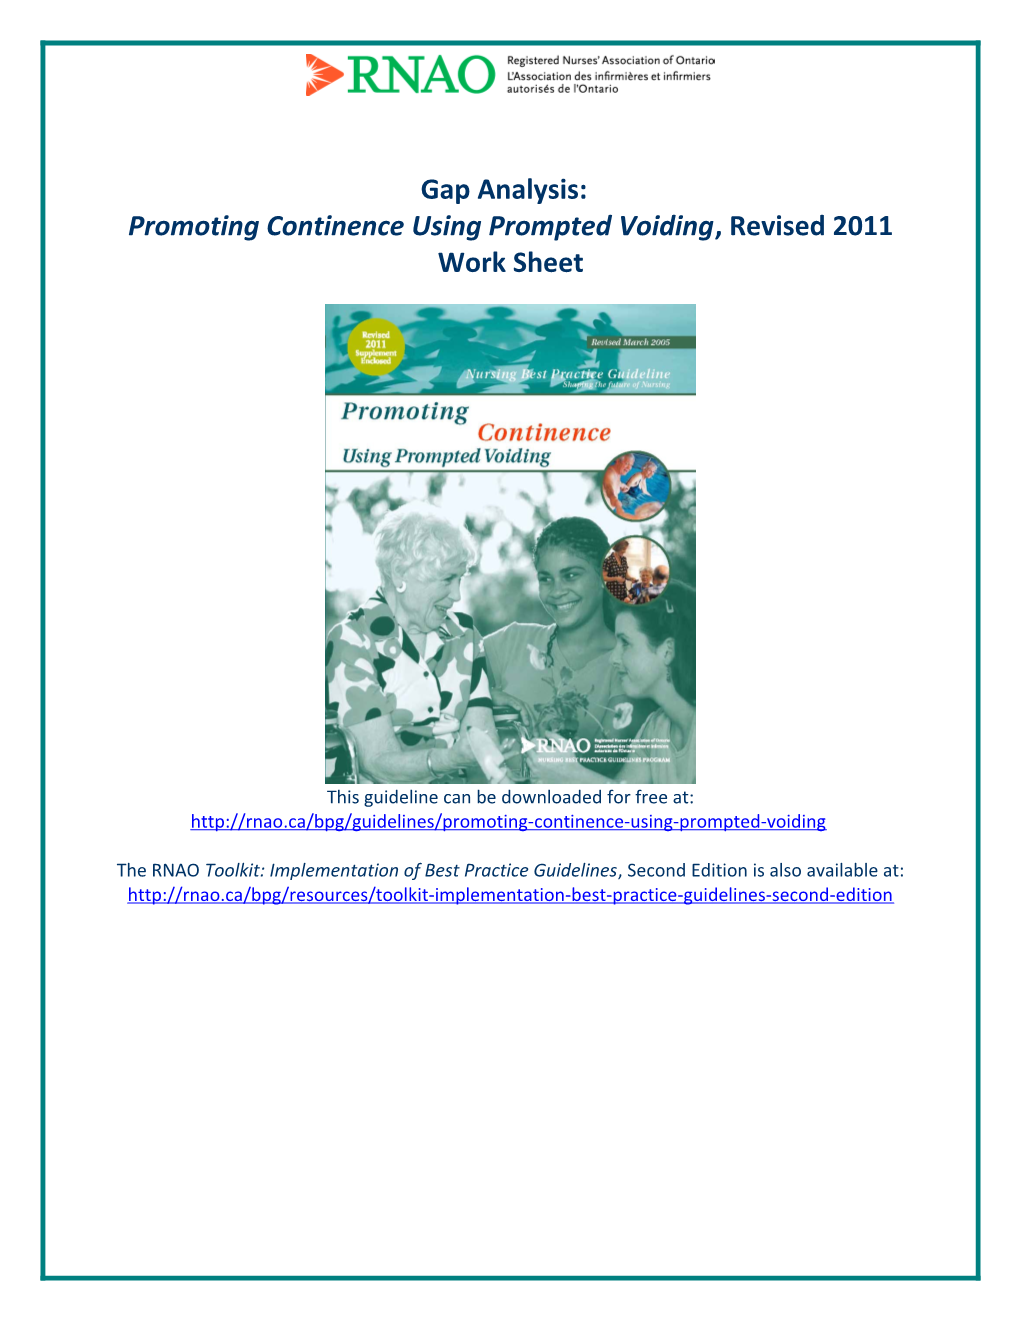 Gap Analysis - Promoting Continence Using Prompted Voiding